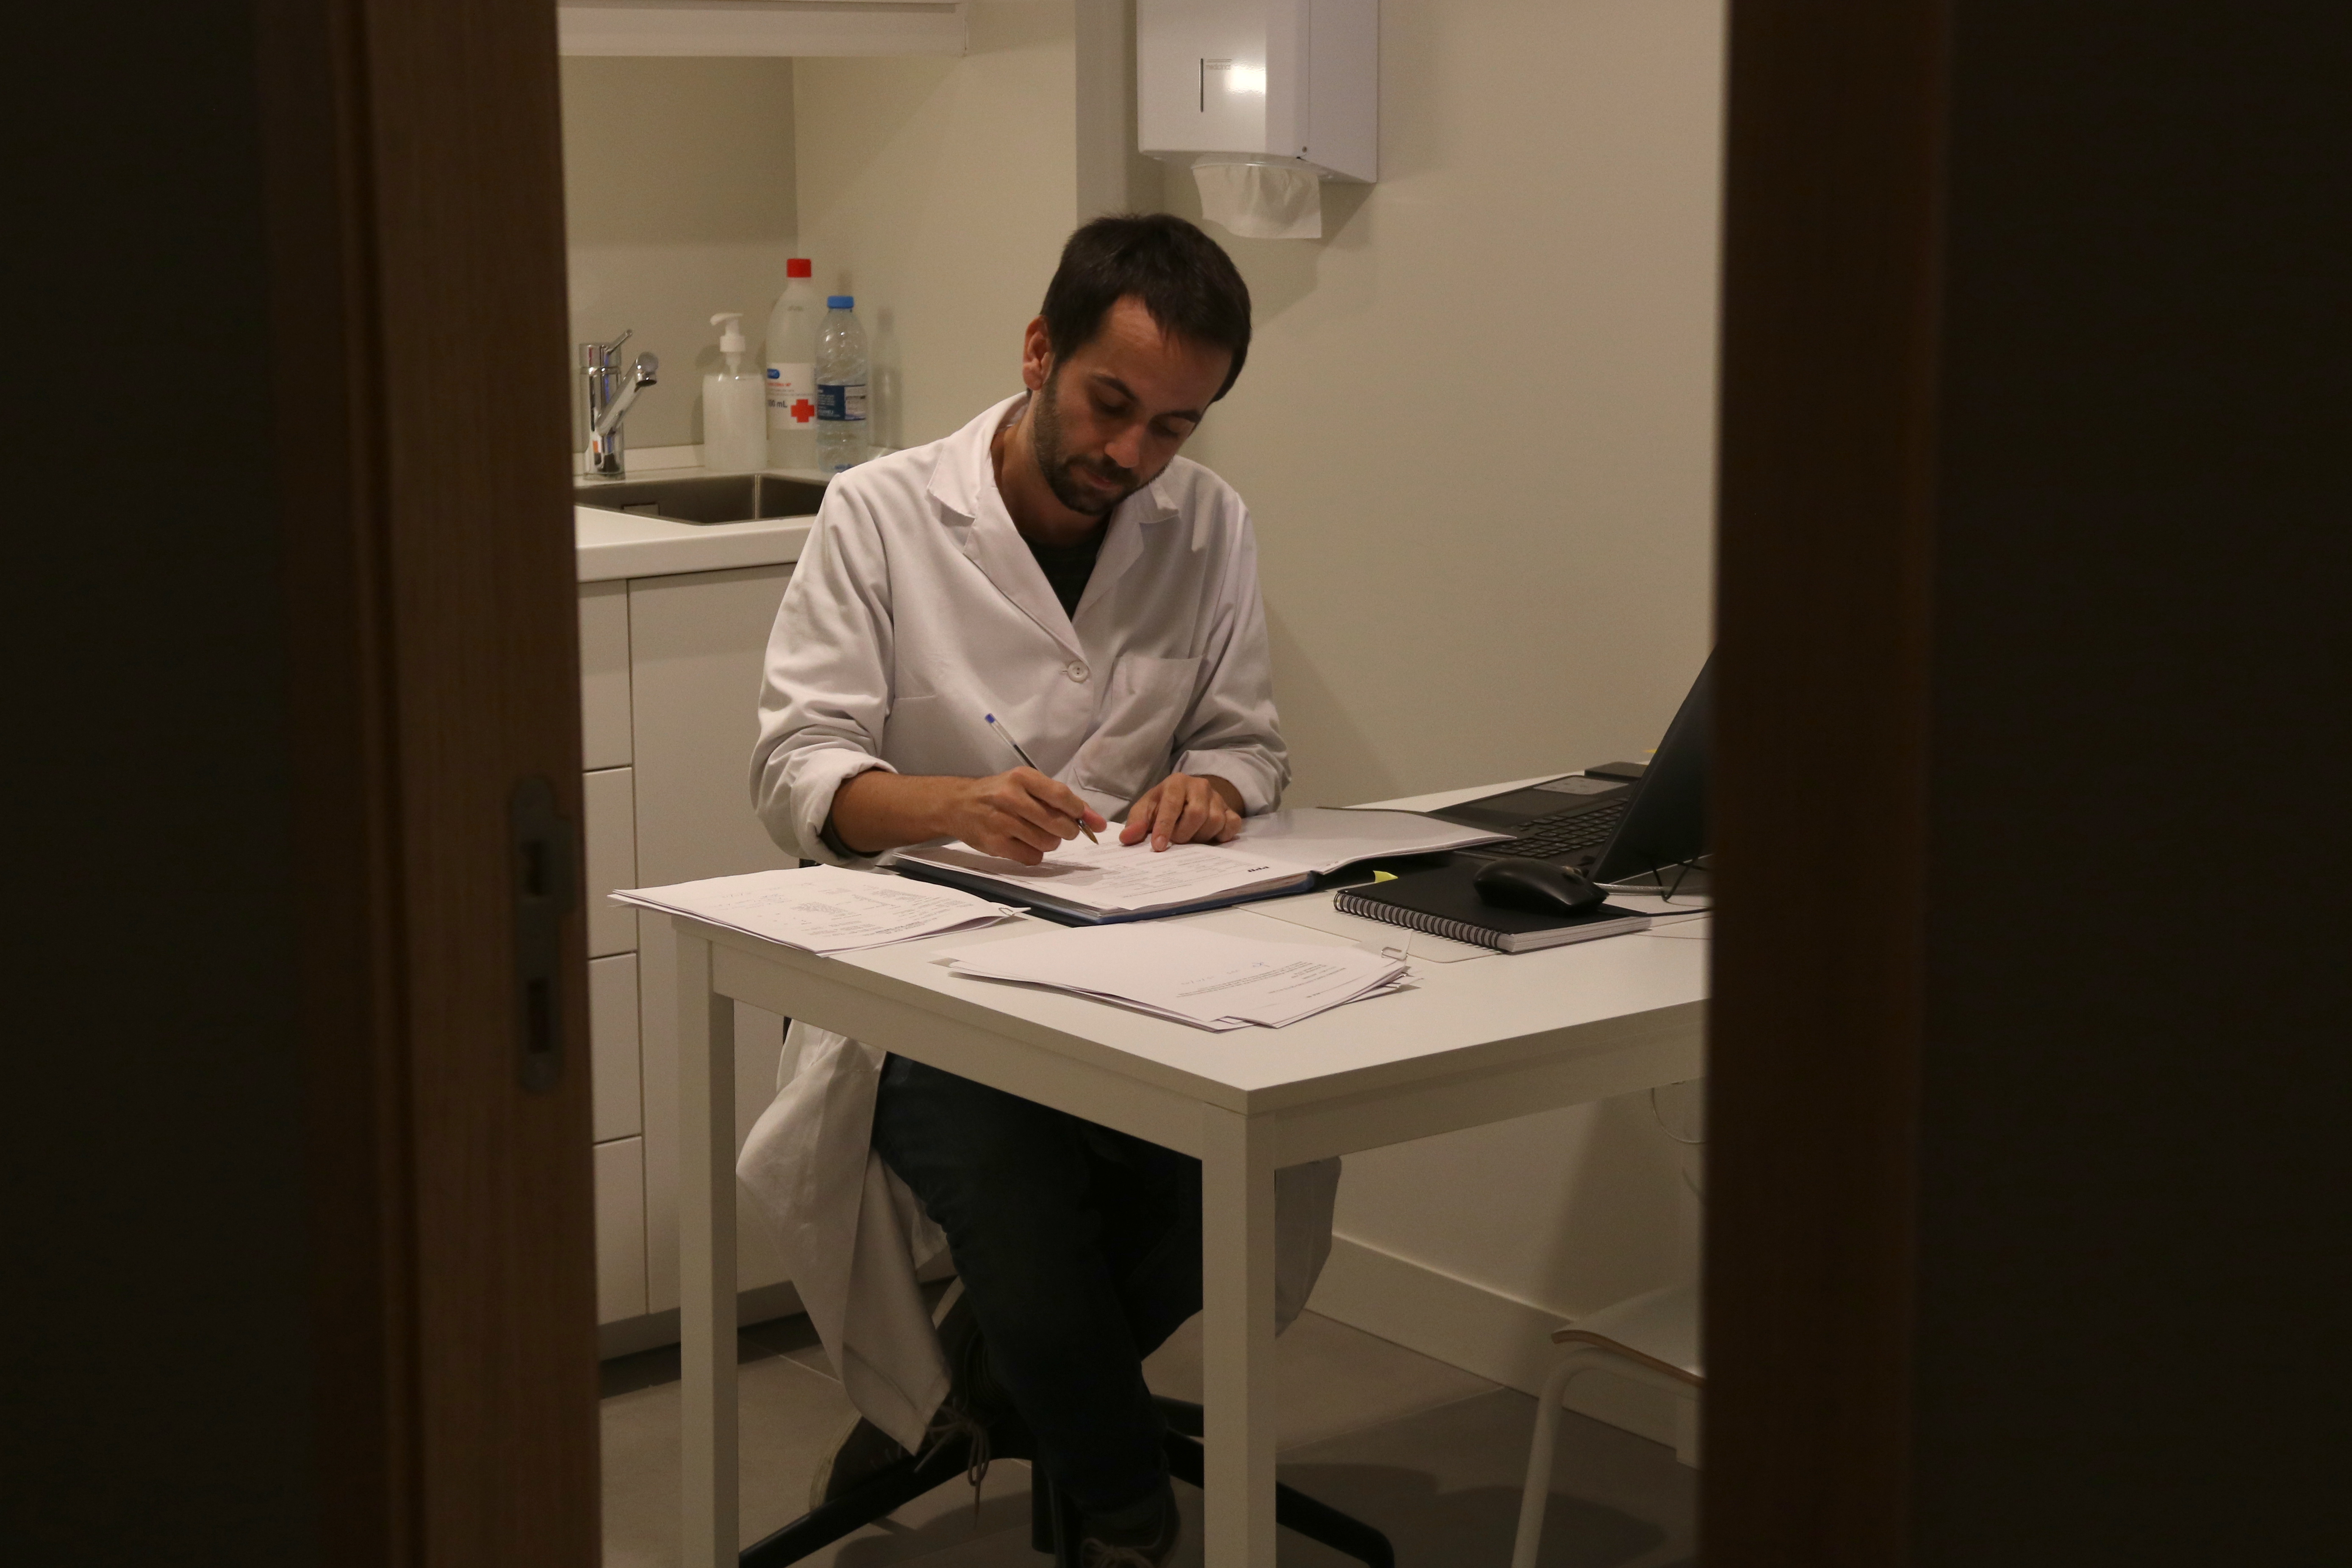 A doctor working at one of the consulting rooms at the new PrEP Point opened on November 15 in Barcelona (by Elisenda Rosanas)